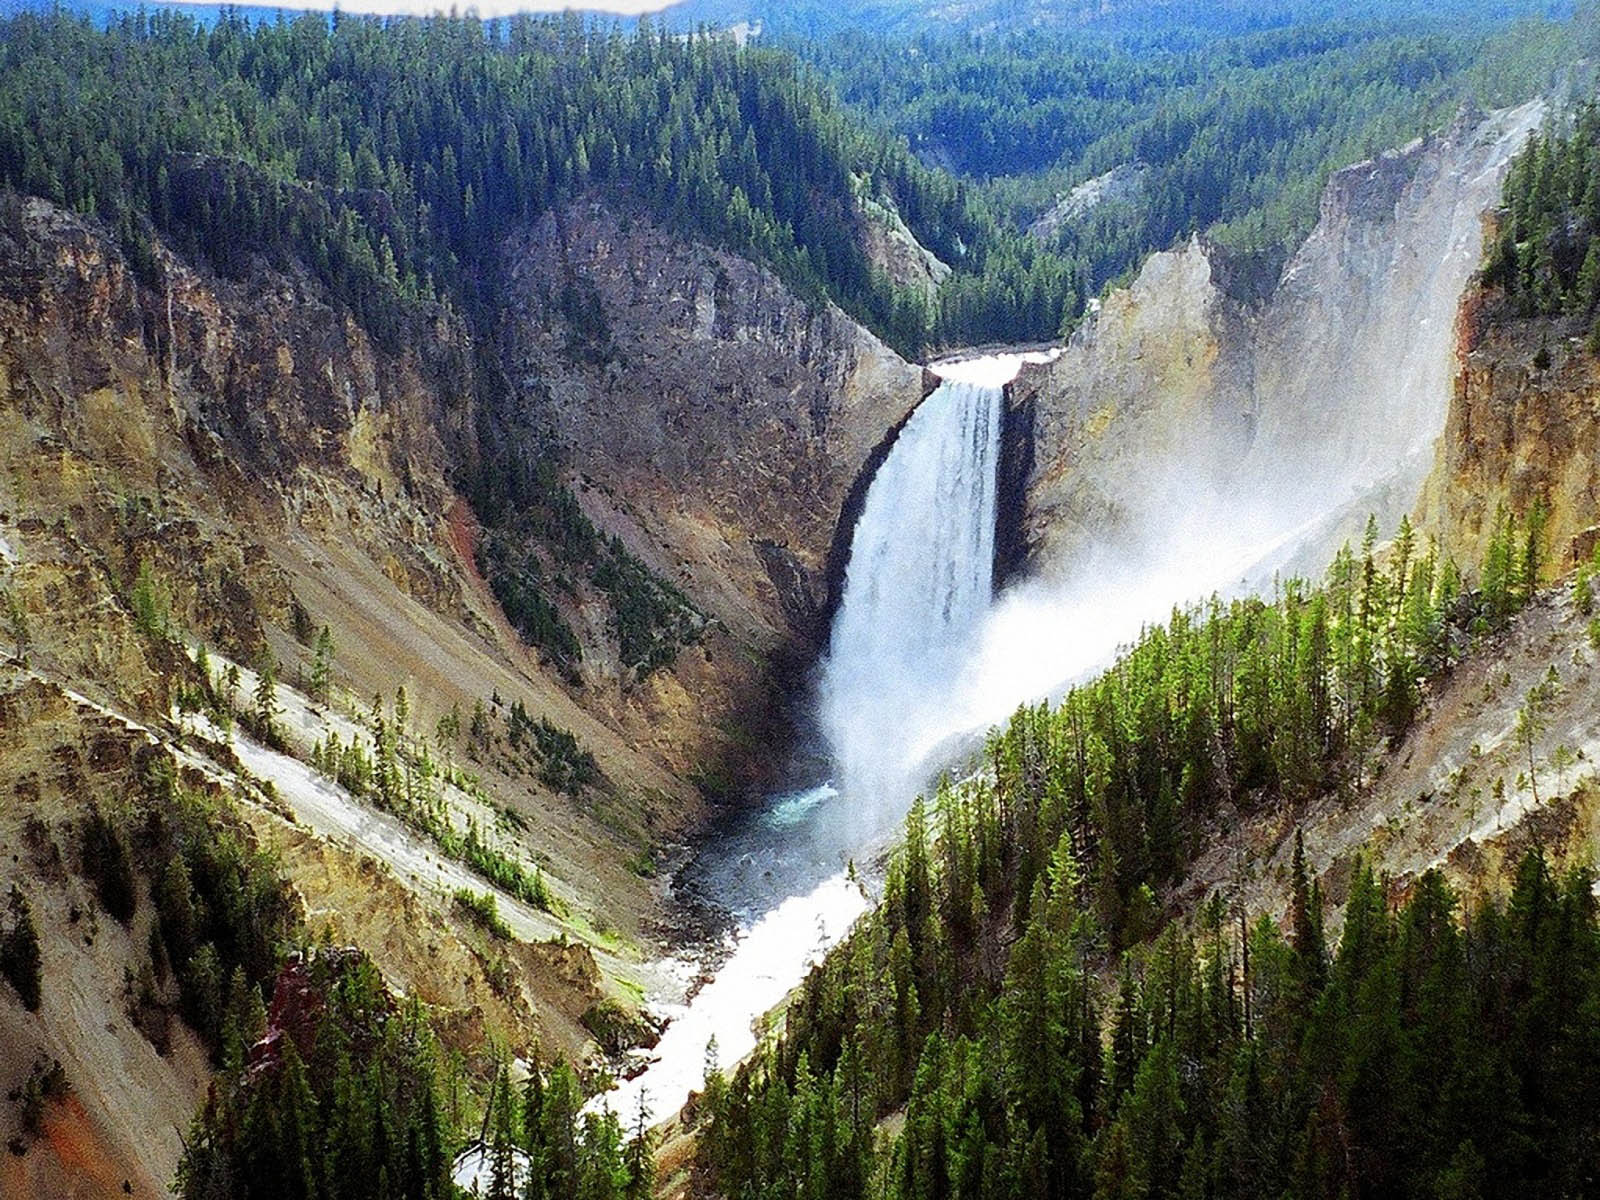 Yellowstone National Park Wallpapers and Background Images   stmednet